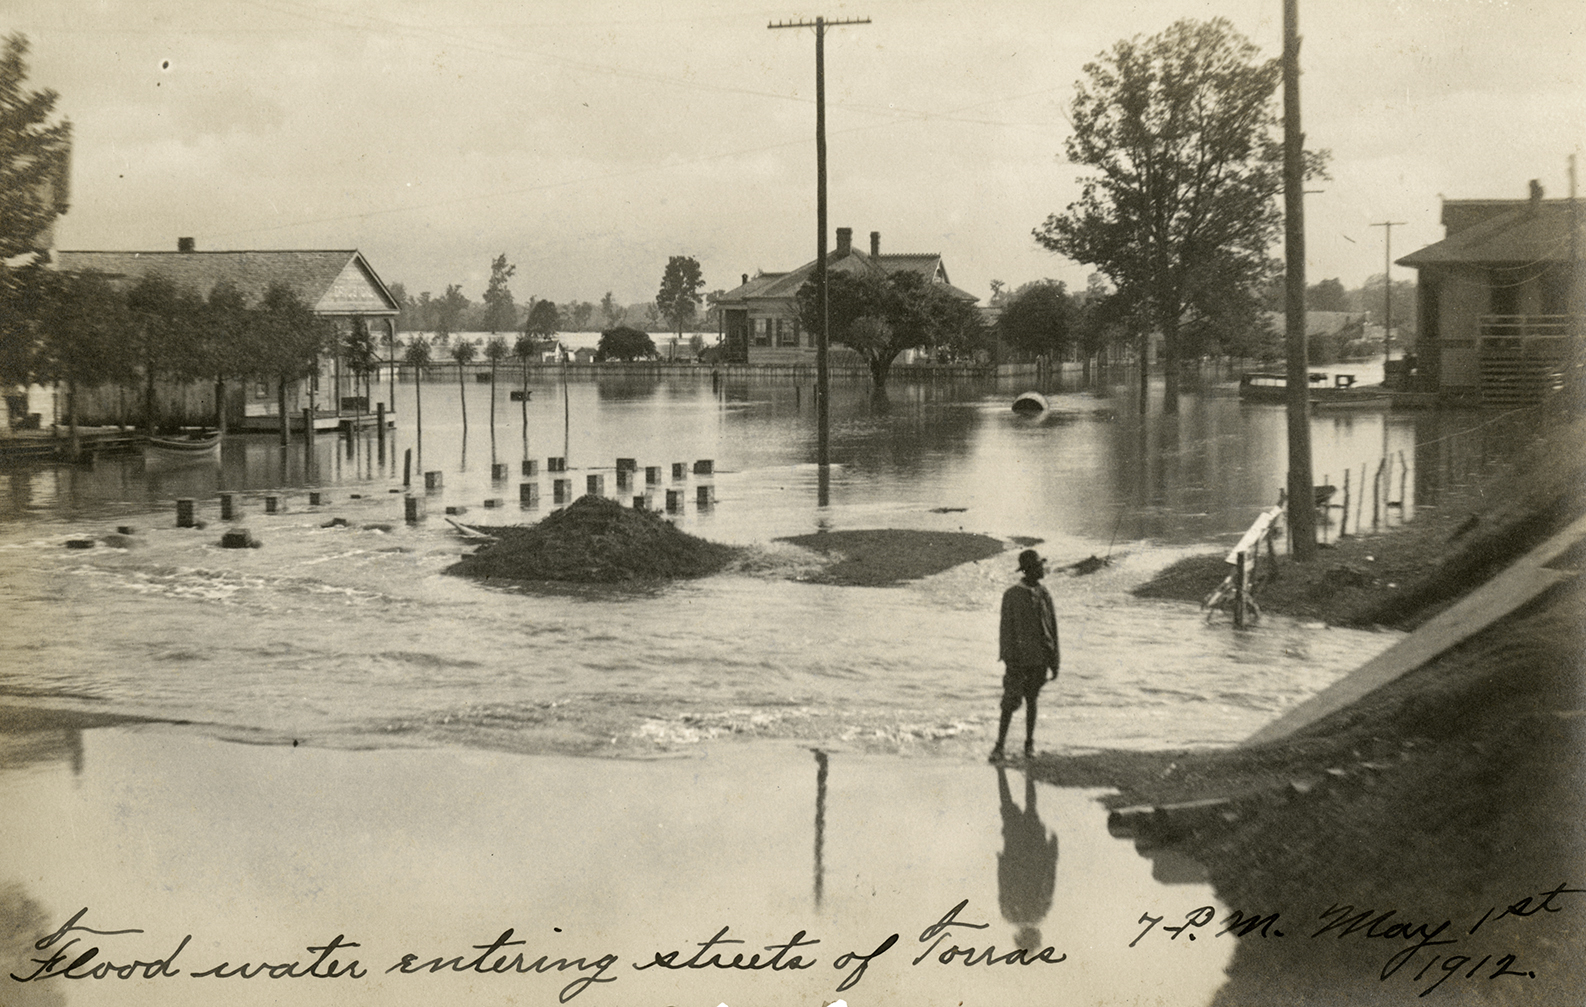 1912 view of flooded area of Torras, Louisiana, along river